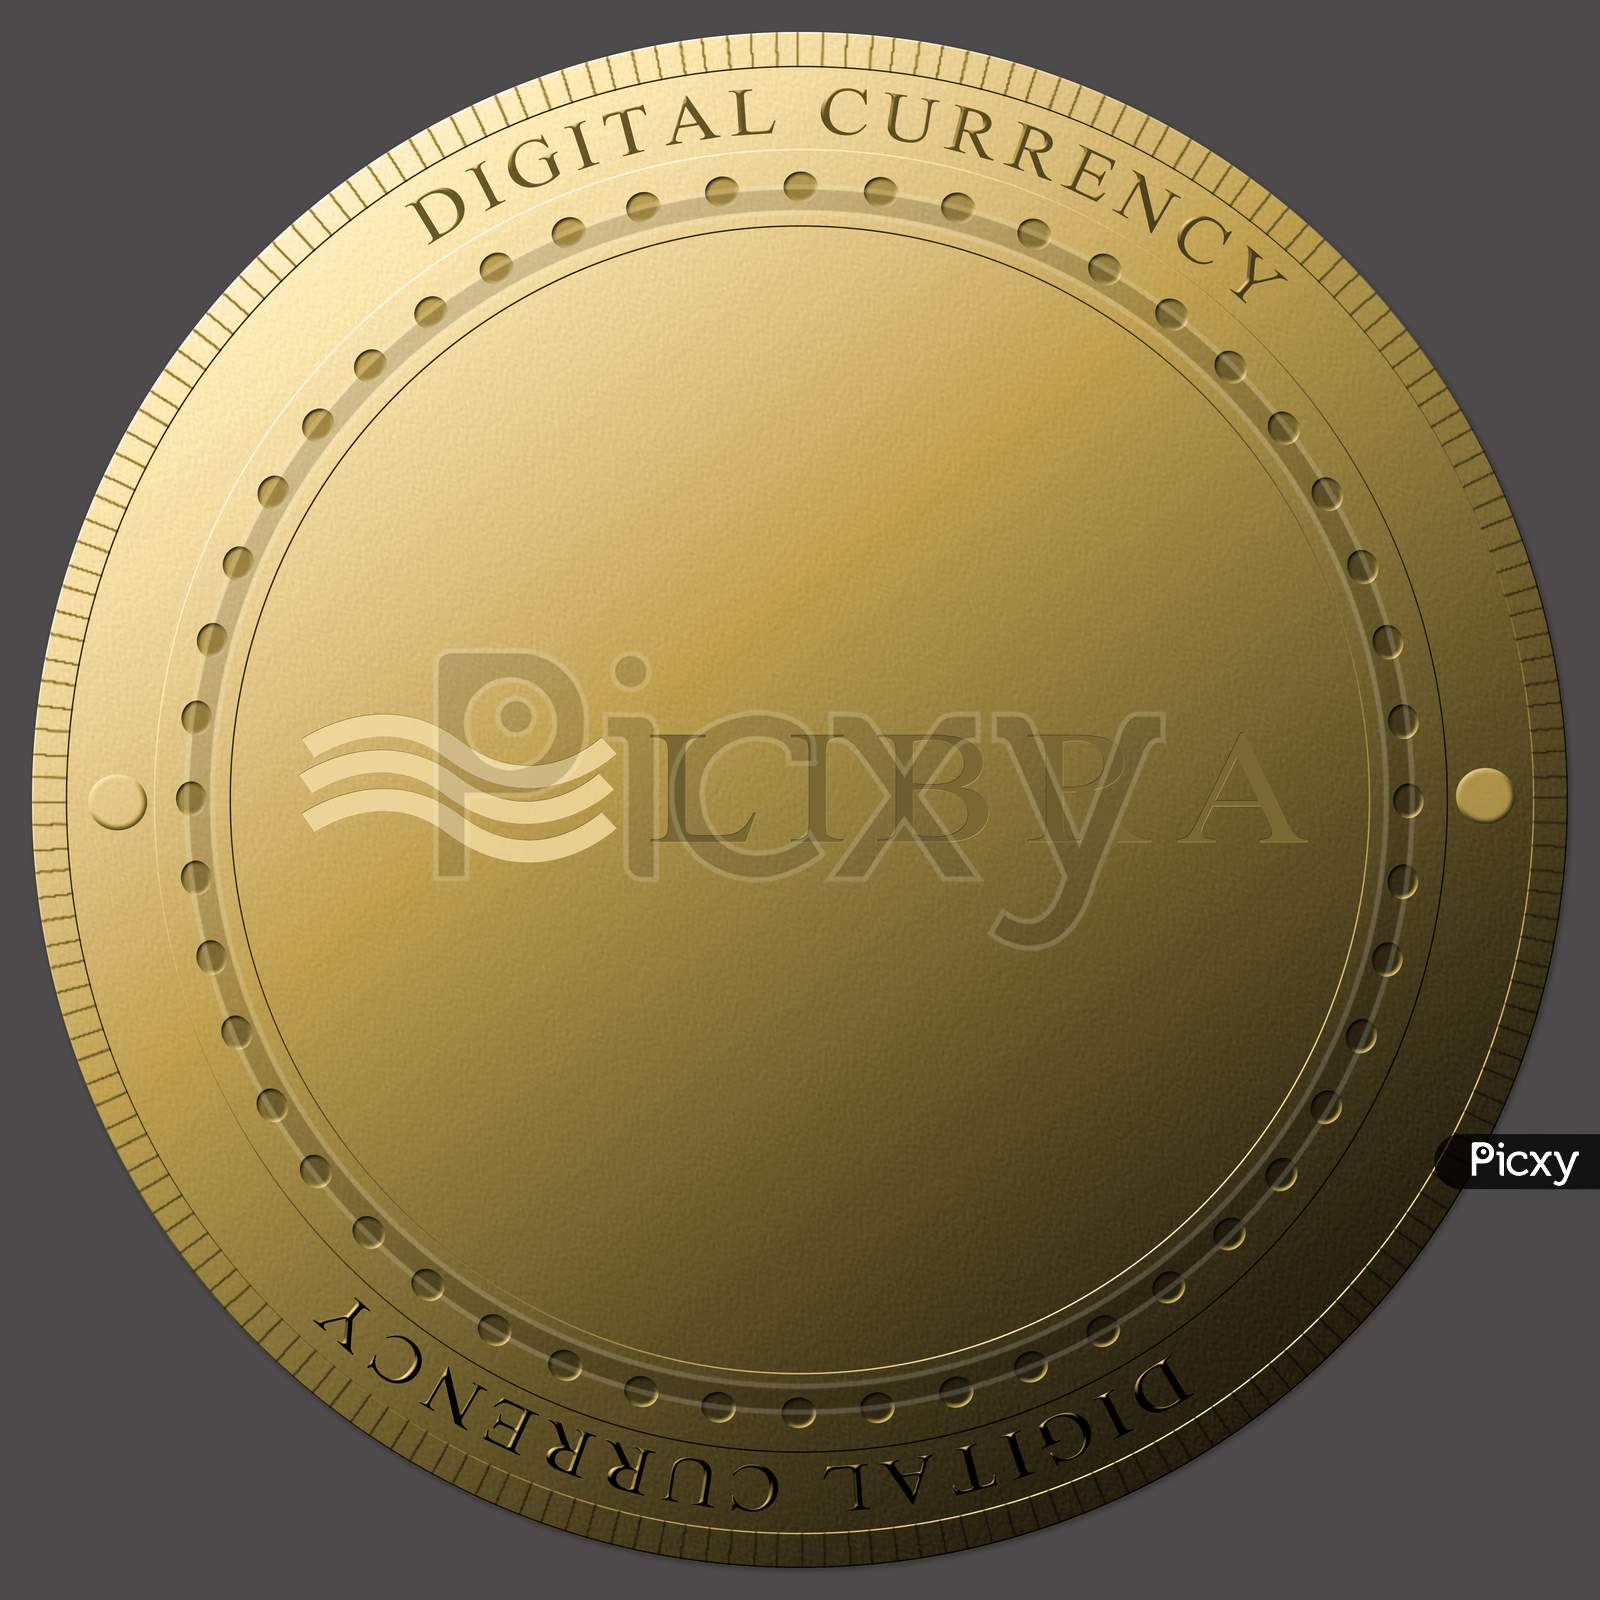 Concept Of Libra New Digital Cryptocurrency Currency Coin.